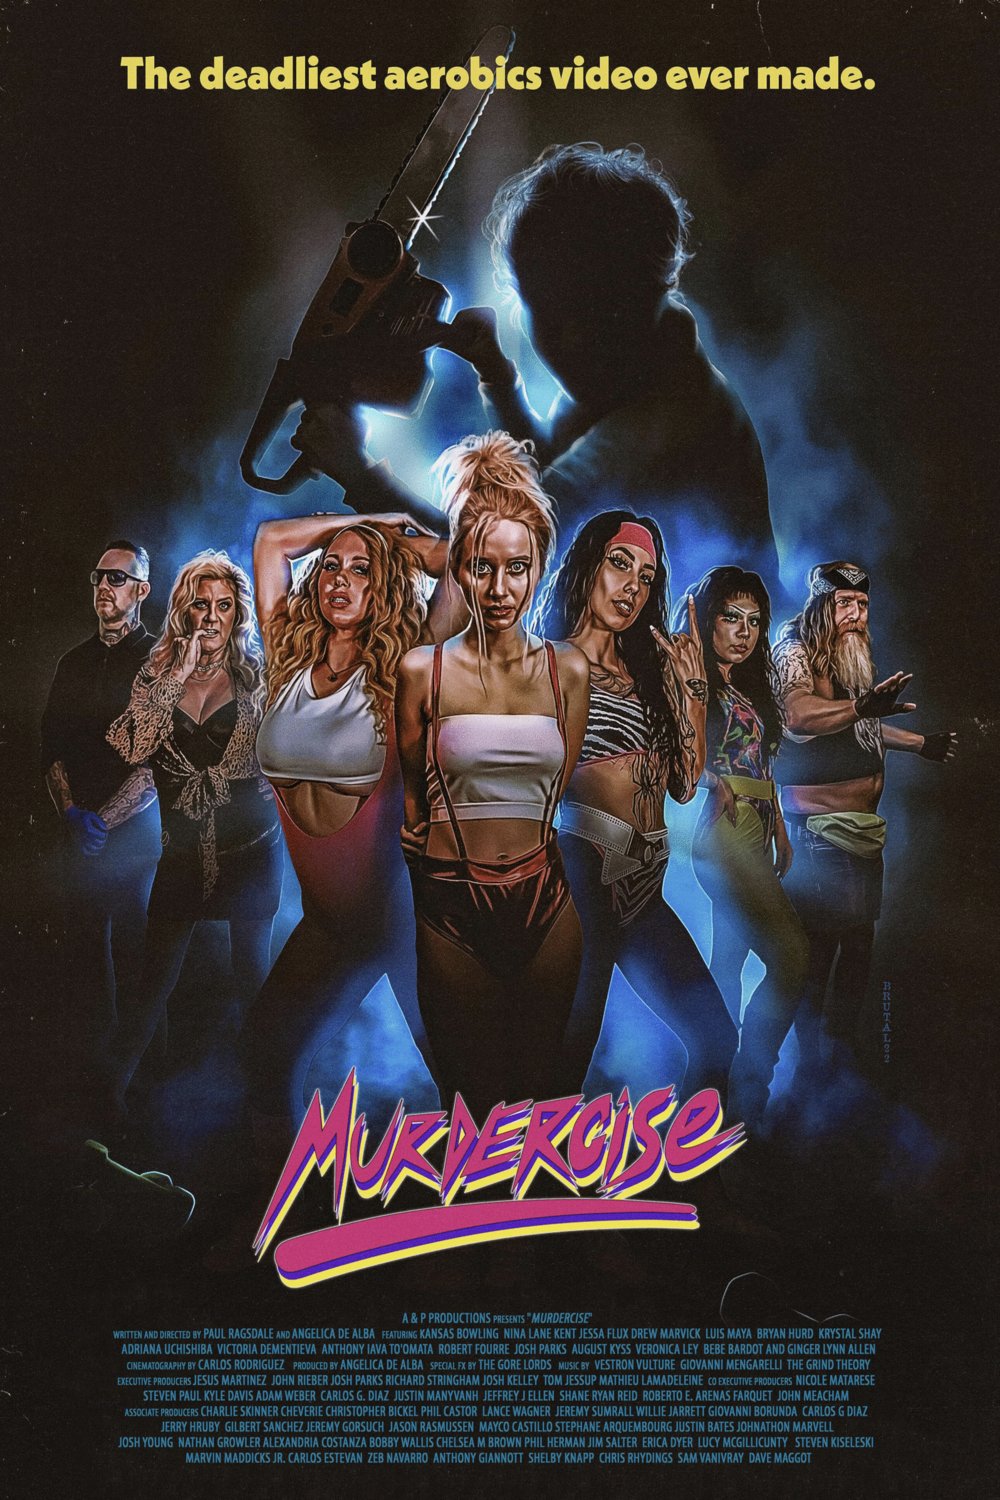 Poster of the movie Murdercise